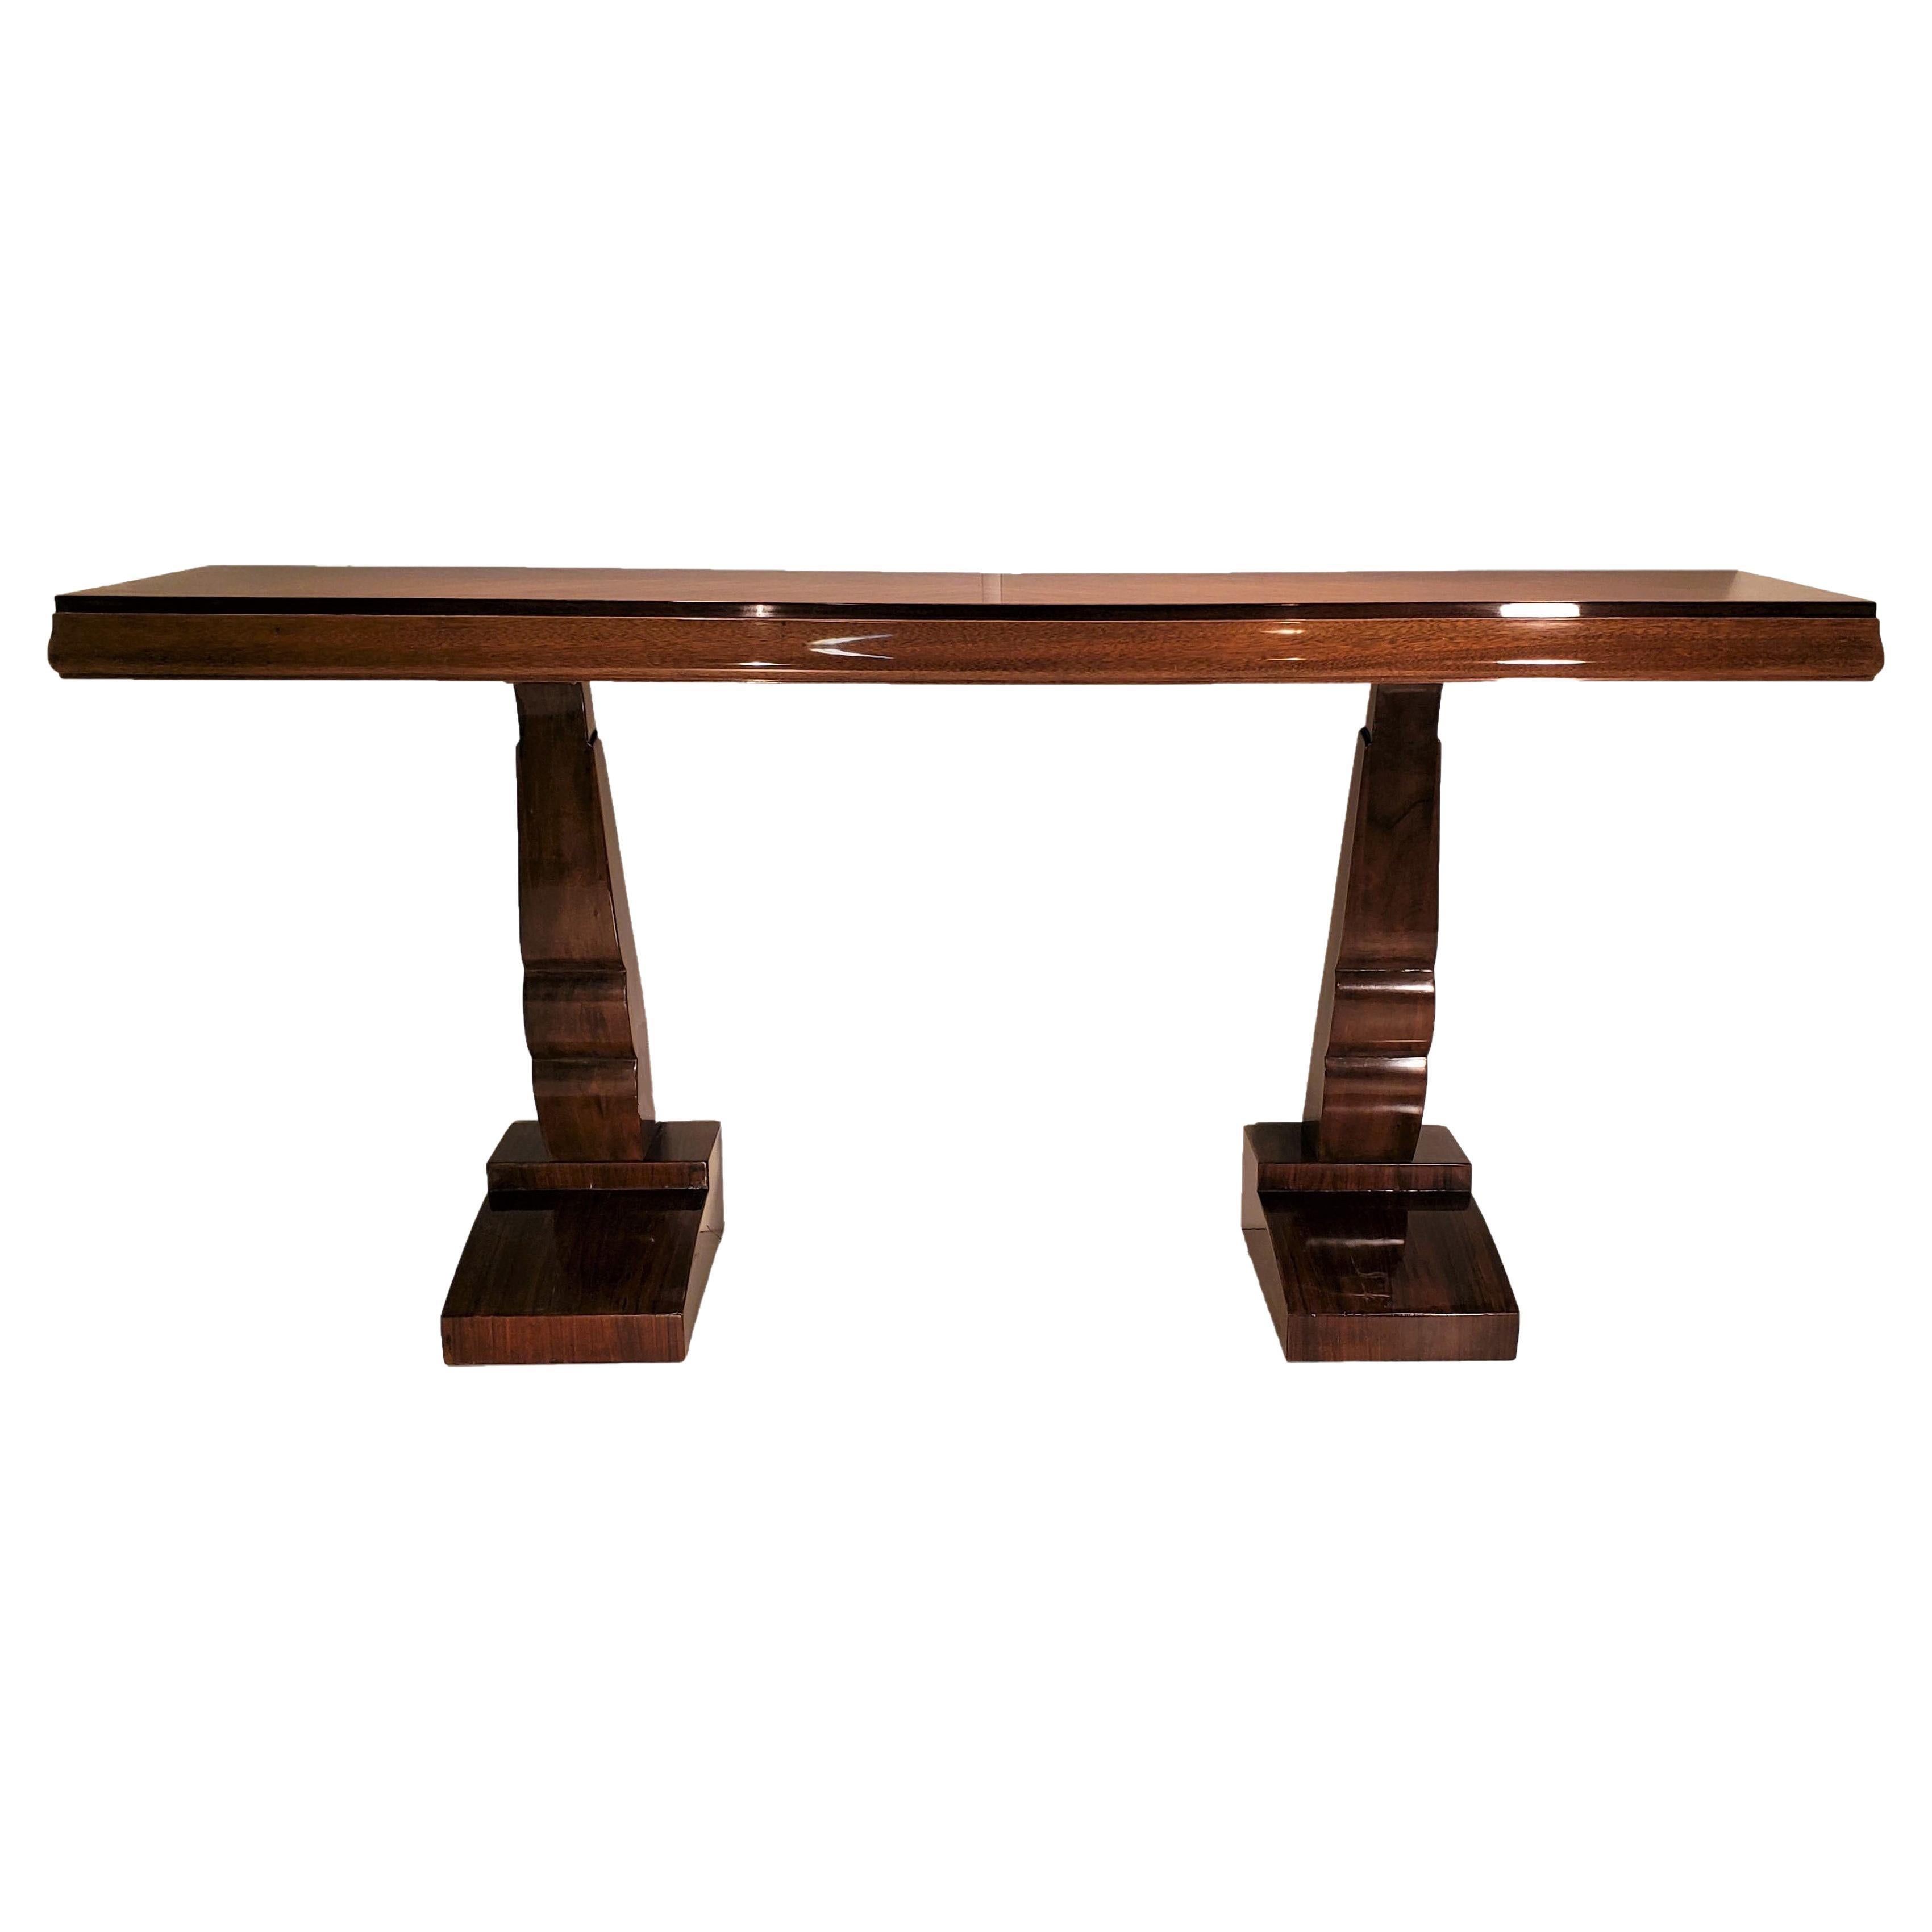 An elegant, original French Modern parquetry inlaid multi wood console in in figured rosewood, walnut, and palisander, featuring double sculptural legs raised on stepped and flanged pediment bases.
Paquebot style in a semi gloss lacquer finish with